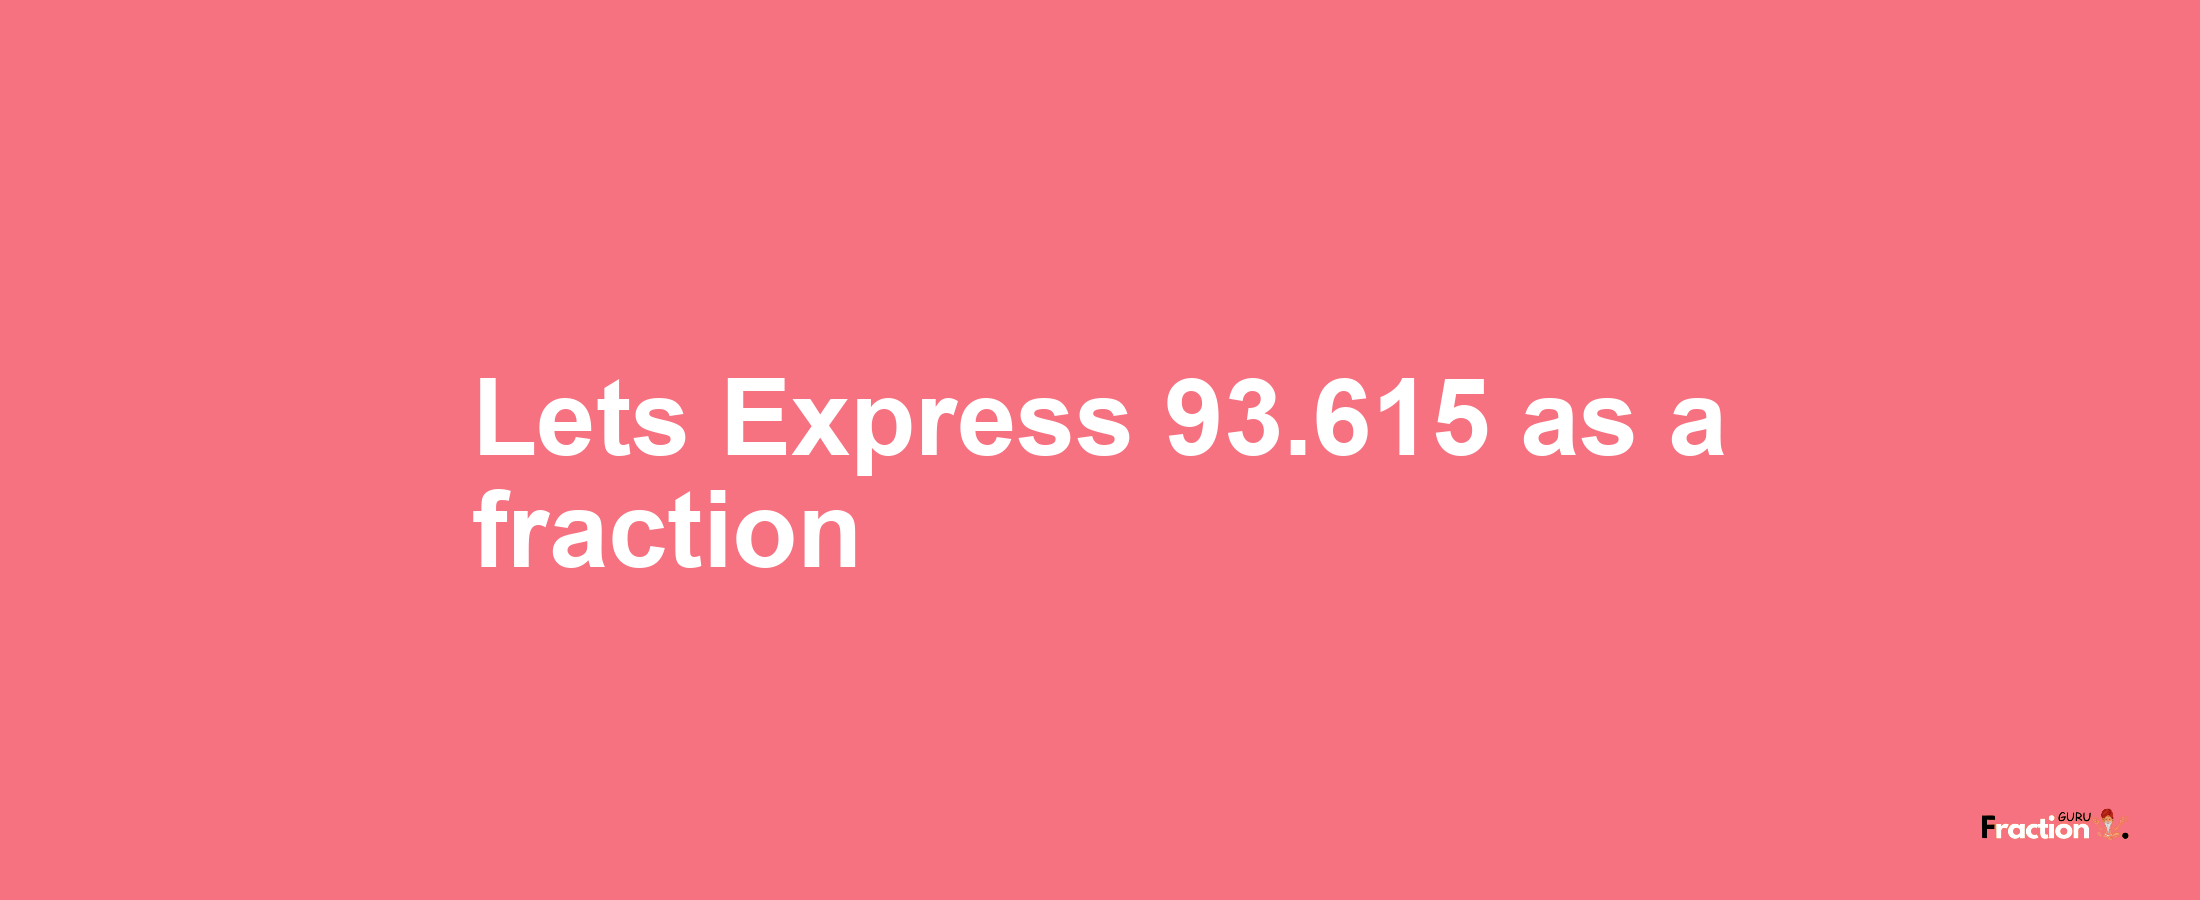 Lets Express 93.615 as afraction